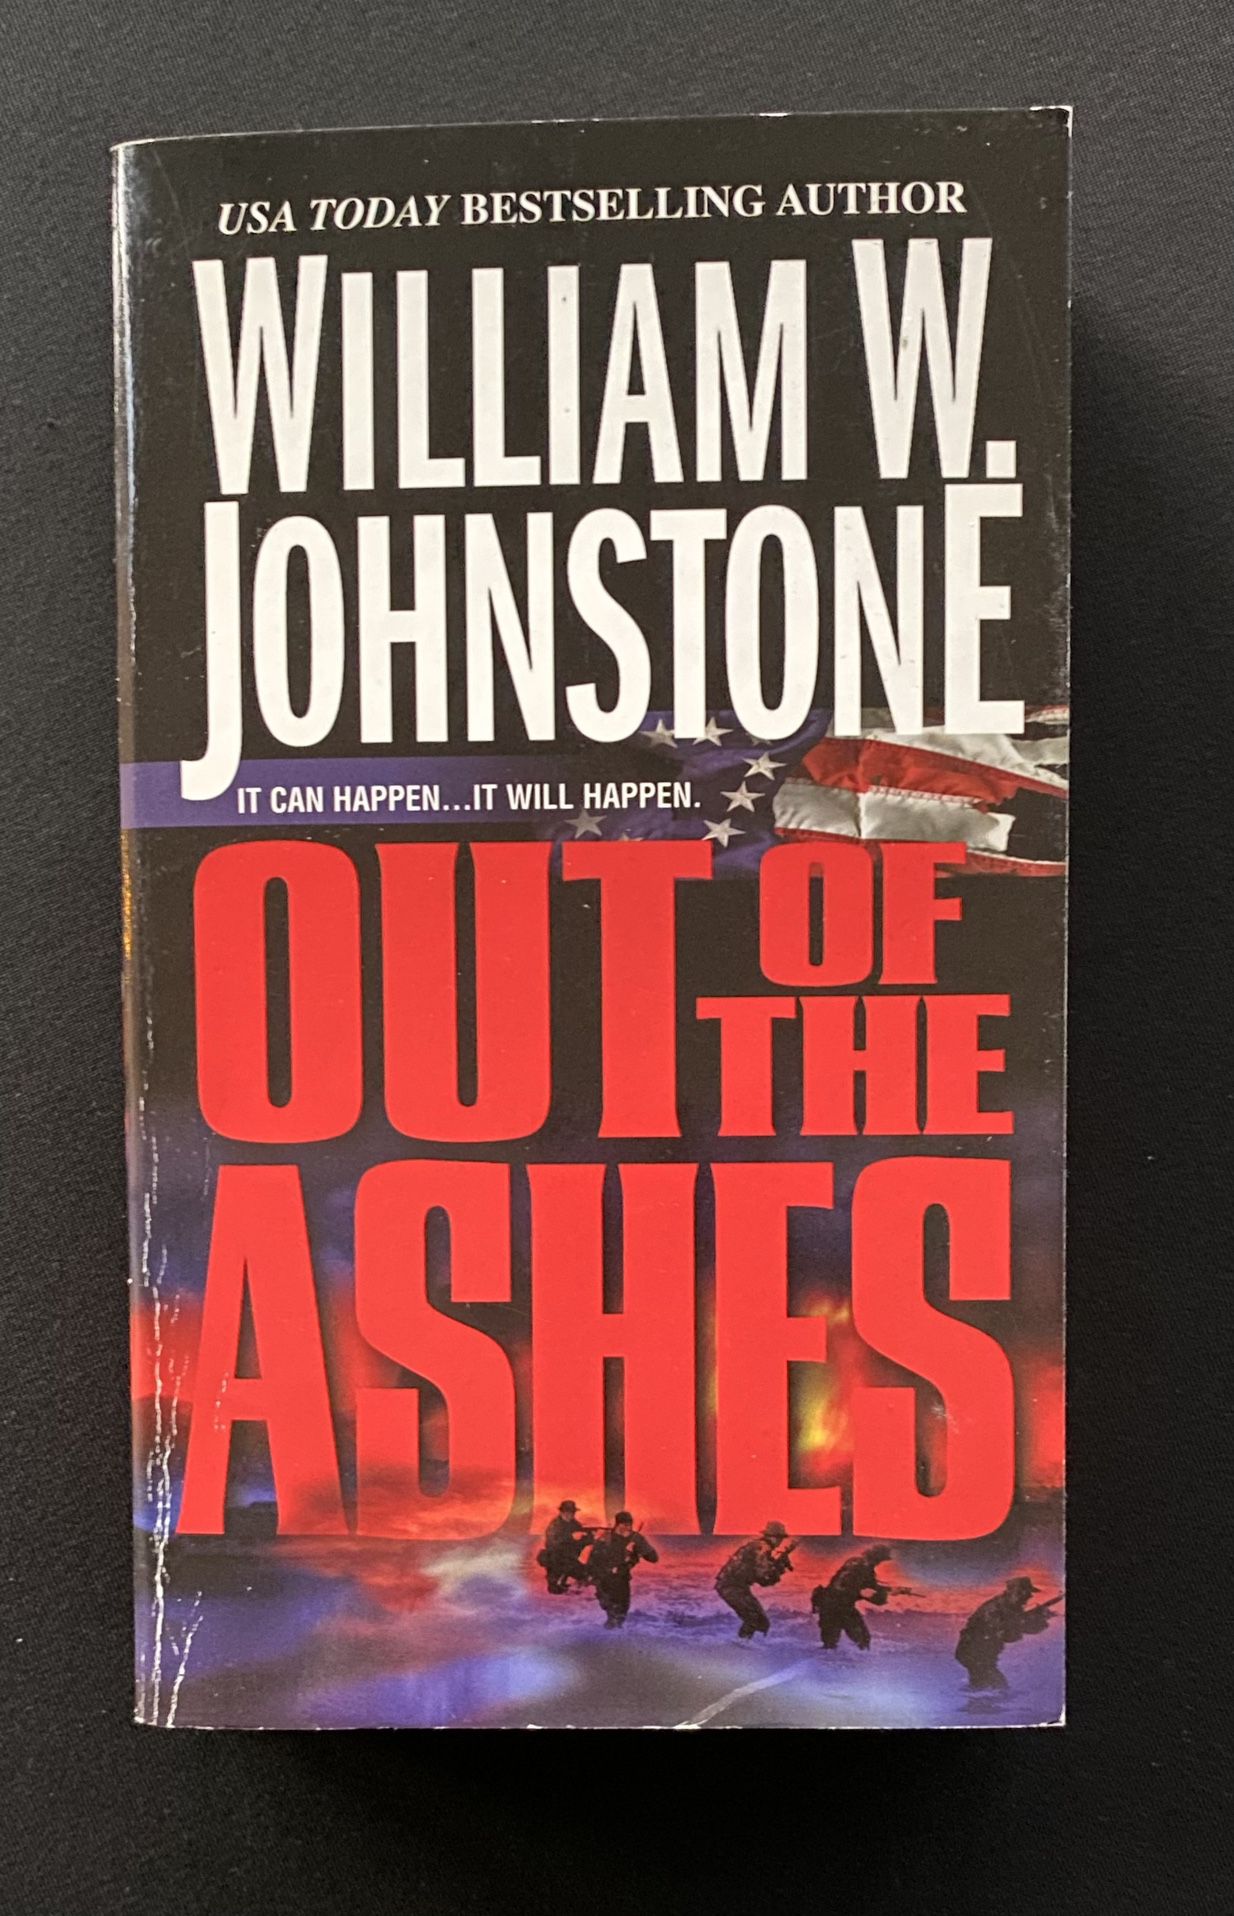 The Ashes Books by William Johnstone